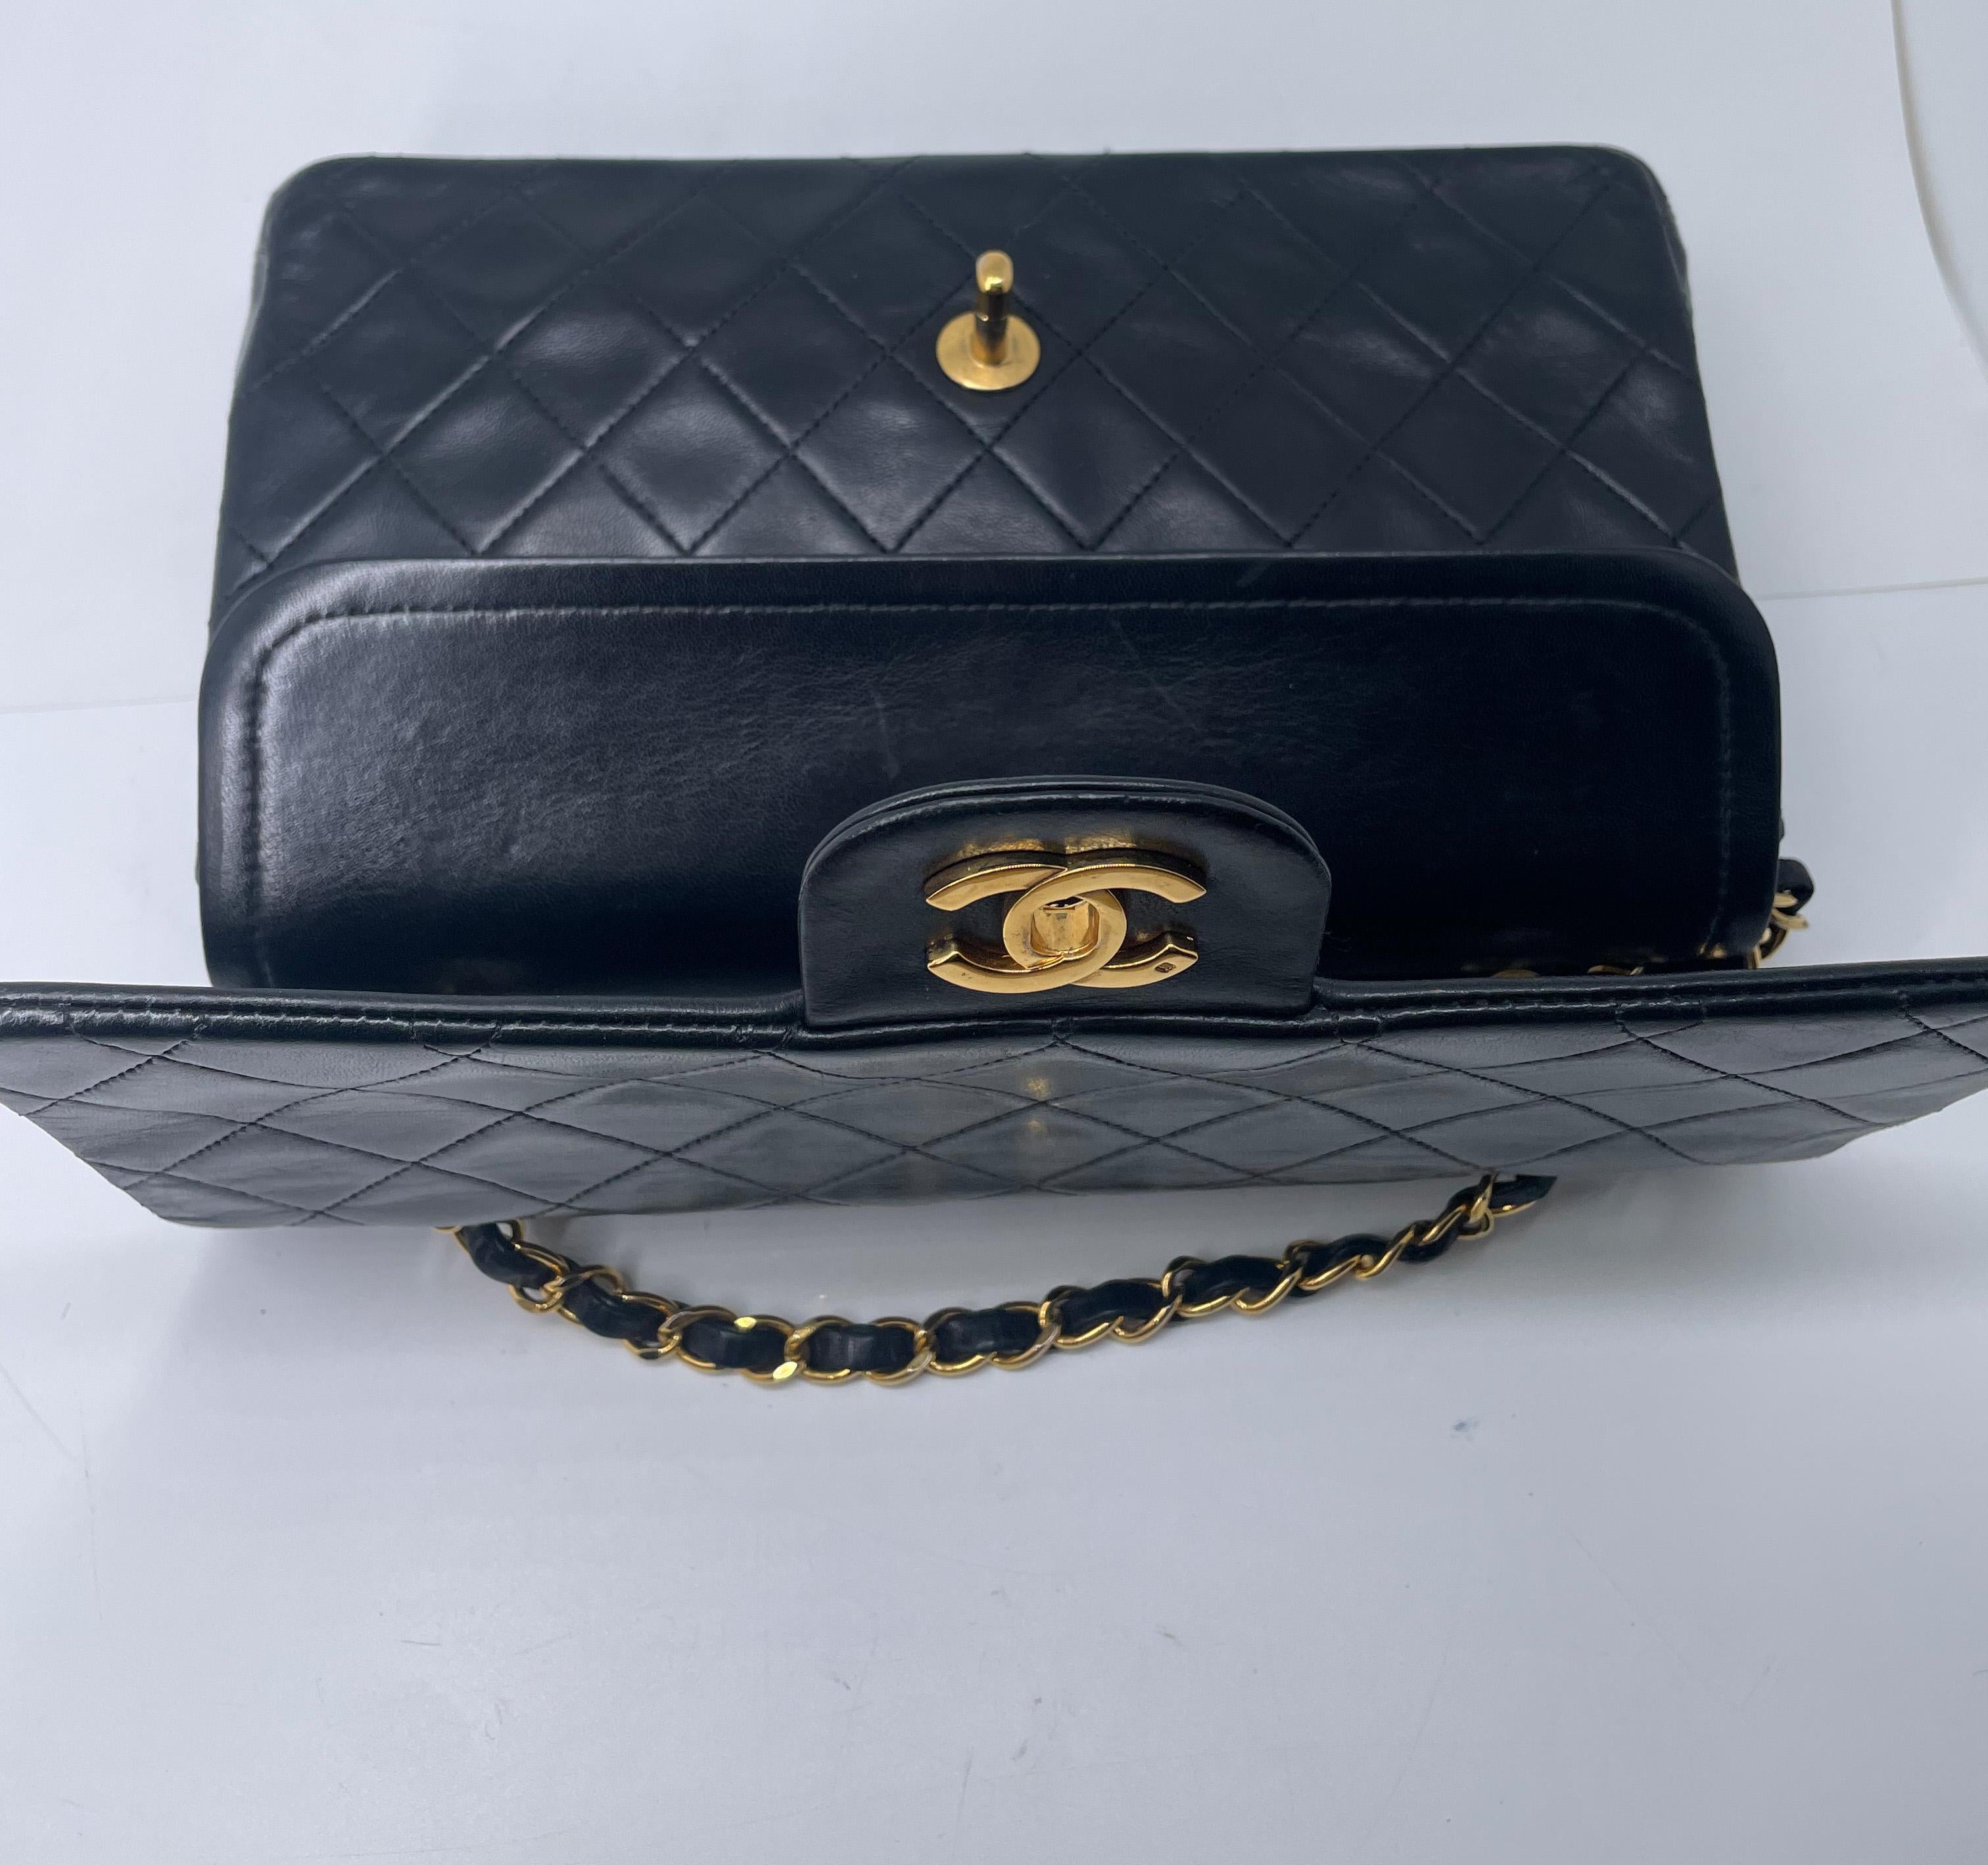 Chanel Classique handbag in black lambskin and 24-carat plated gold metal For Sale 13